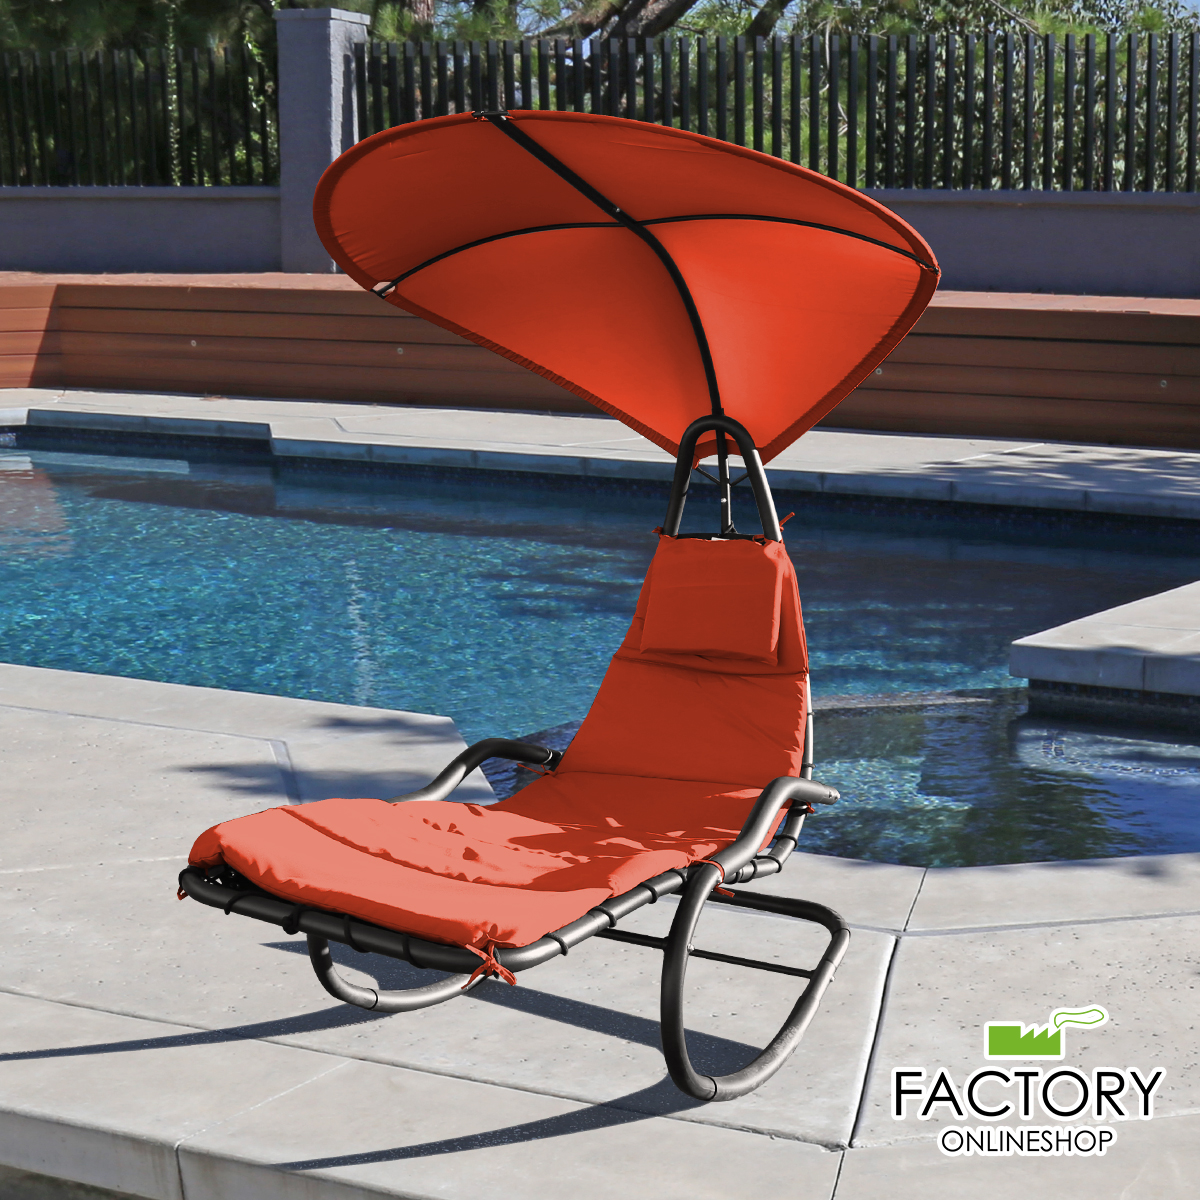 Rocking Hanging Lounge Chair - Curved Chaise Rocking Lounge Chair Swing For Backyard Patio w/ Built-in Pillow Removable Canopy with stand {Orange} - image 1 of 8